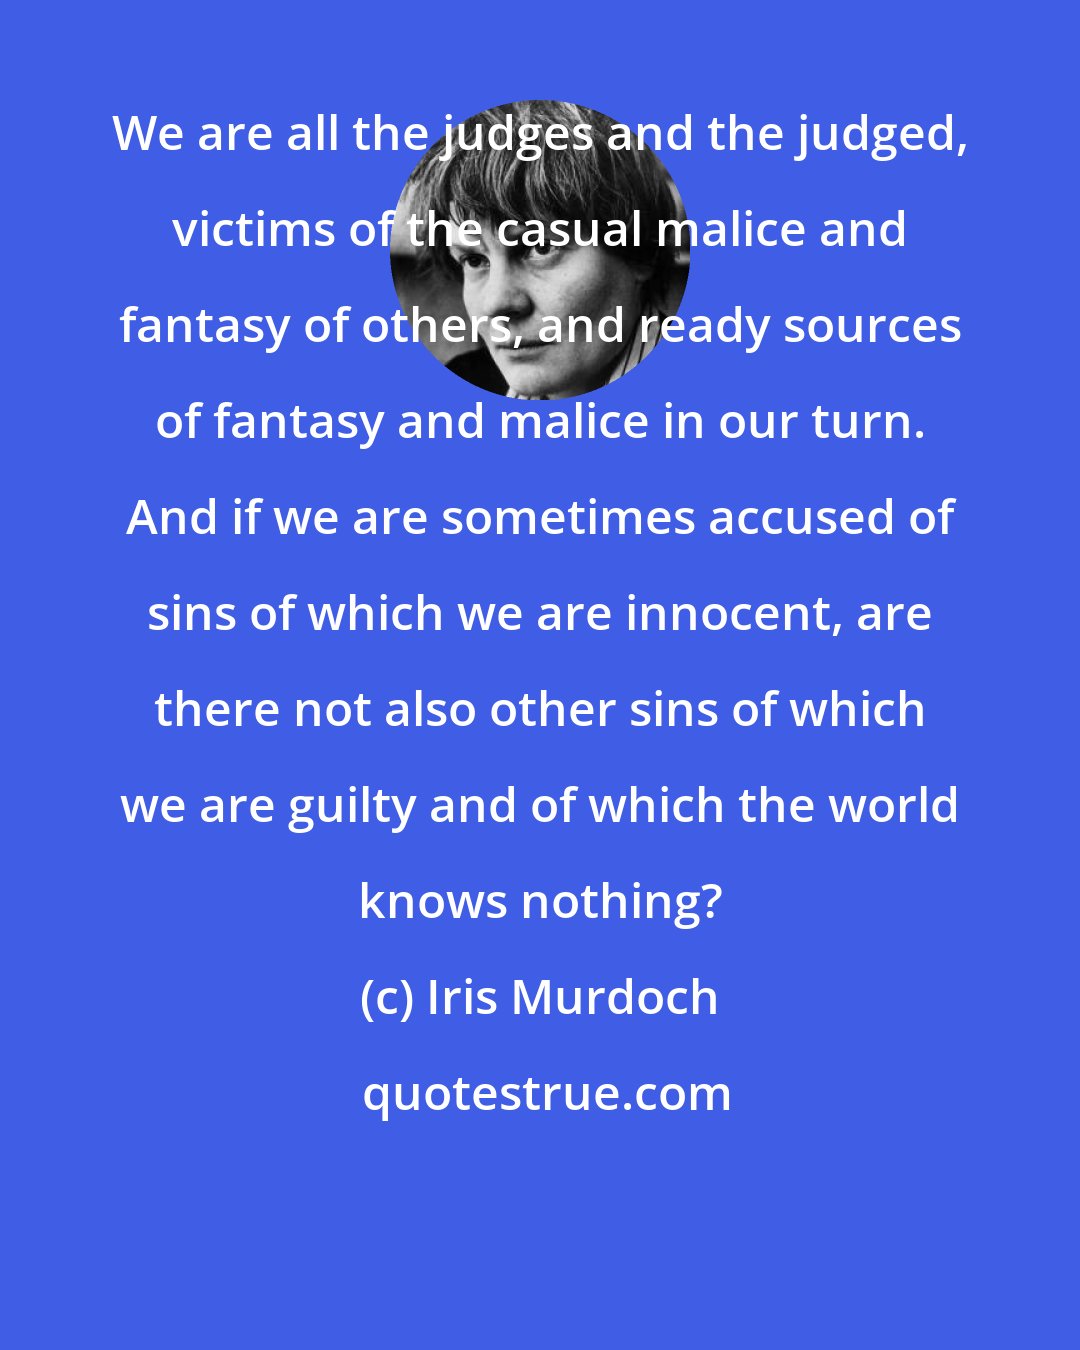 Iris Murdoch: We are all the judges and the judged, victims of the casual malice and fantasy of others, and ready sources of fantasy and malice in our turn. And if we are sometimes accused of sins of which we are innocent, are there not also other sins of which we are guilty and of which the world knows nothing?